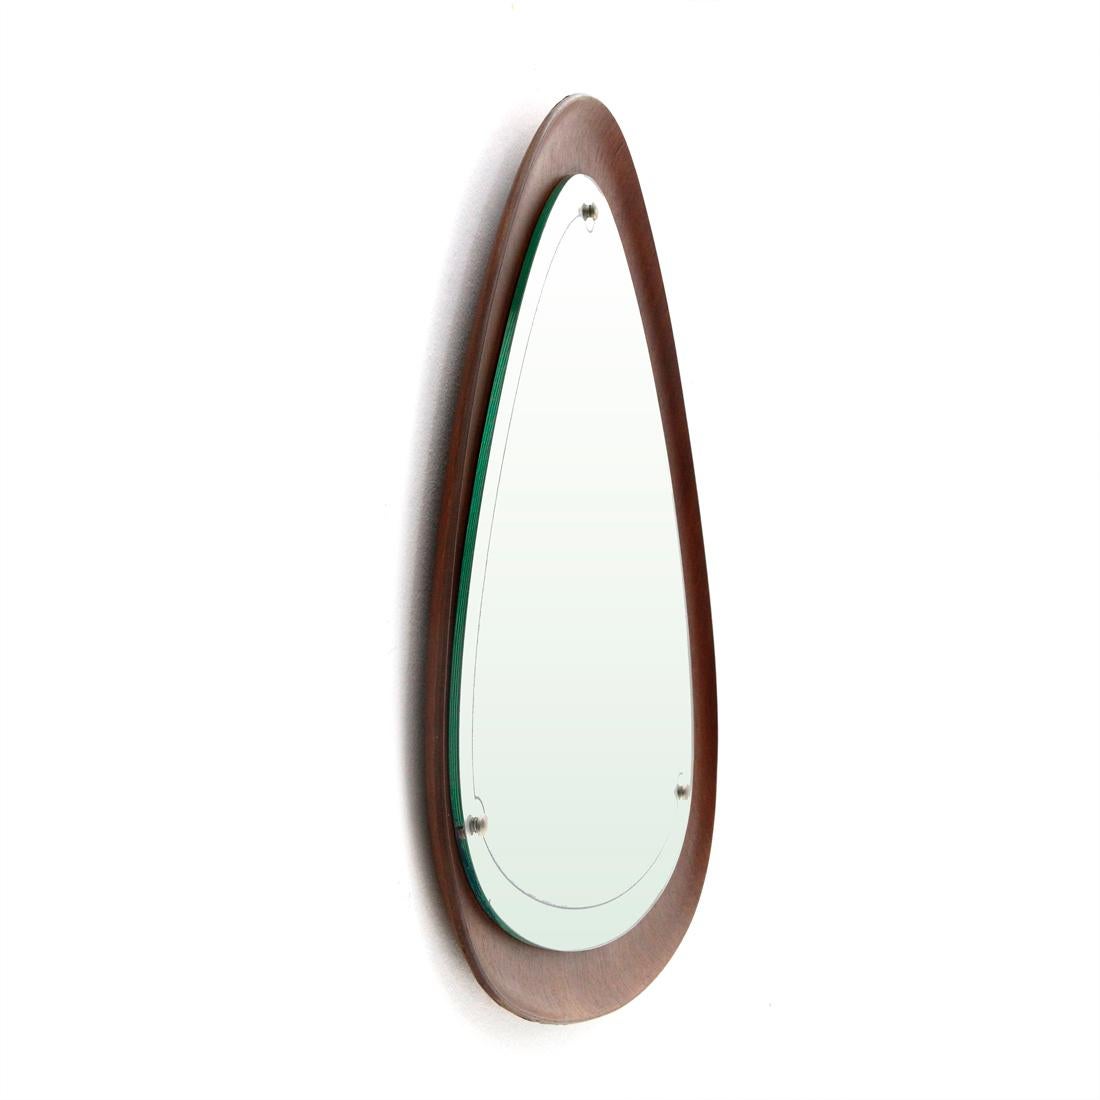 Italian manufacture mirror produced in the 1960s.
Frame in teak veneered plywood with curved edges.
Mirror with decorative line along the edge.
Aluminum studs.
Good condition, some marks on the mirrored surface, and some lacks on the